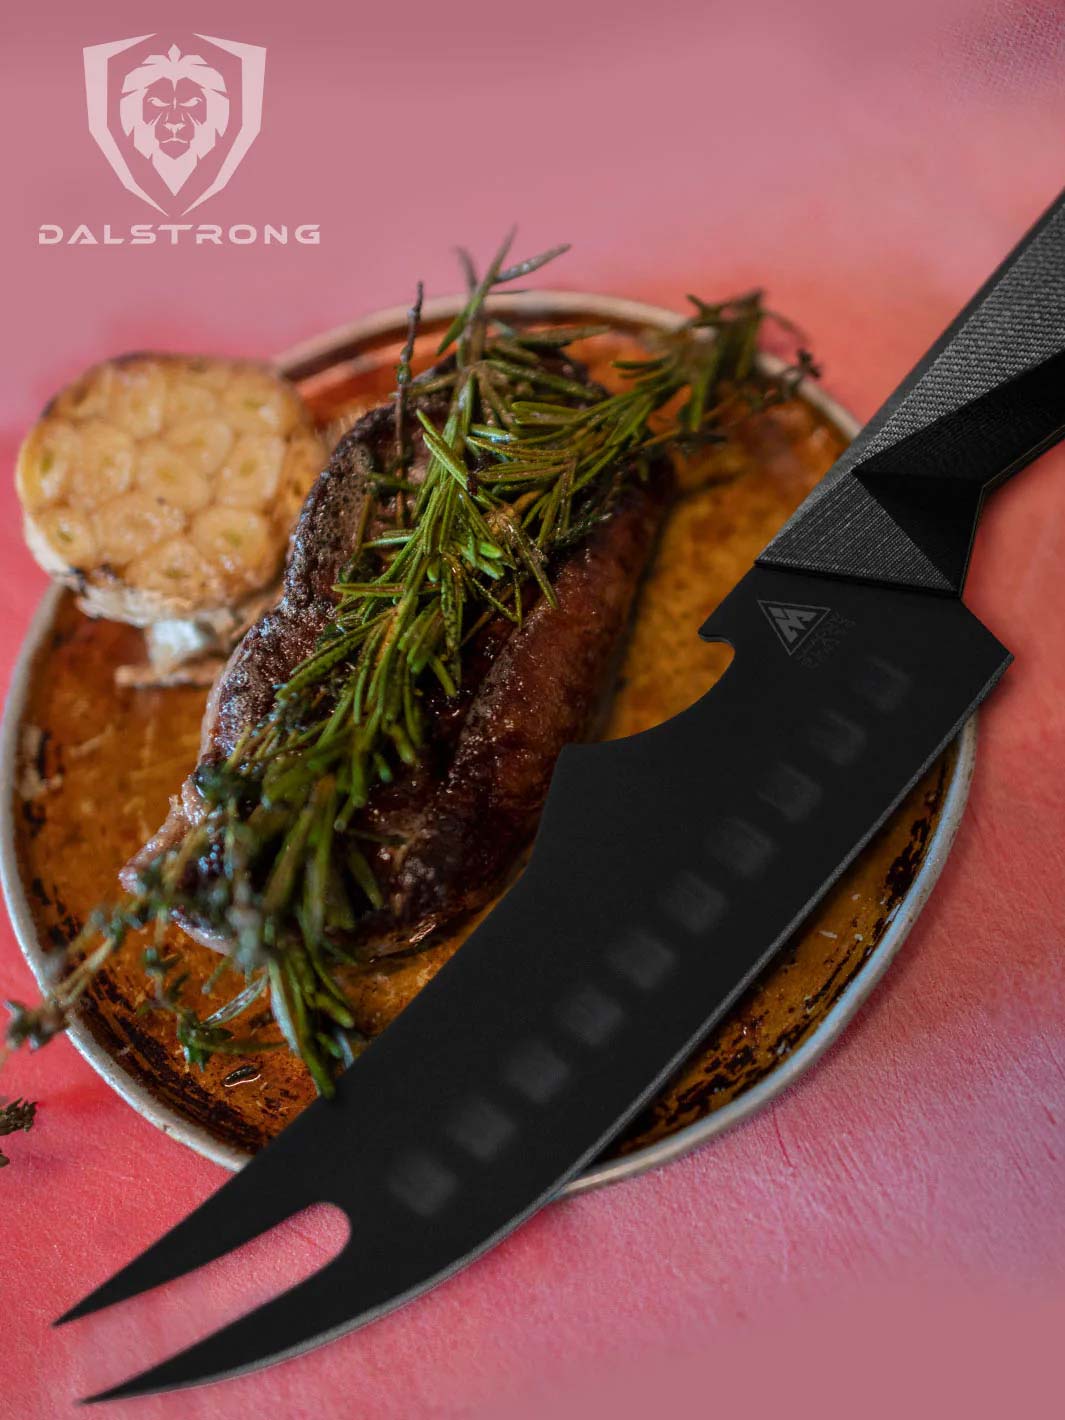 Dalstrong shadow black series 6.5 inch pitmaster knife with a steak on the side.